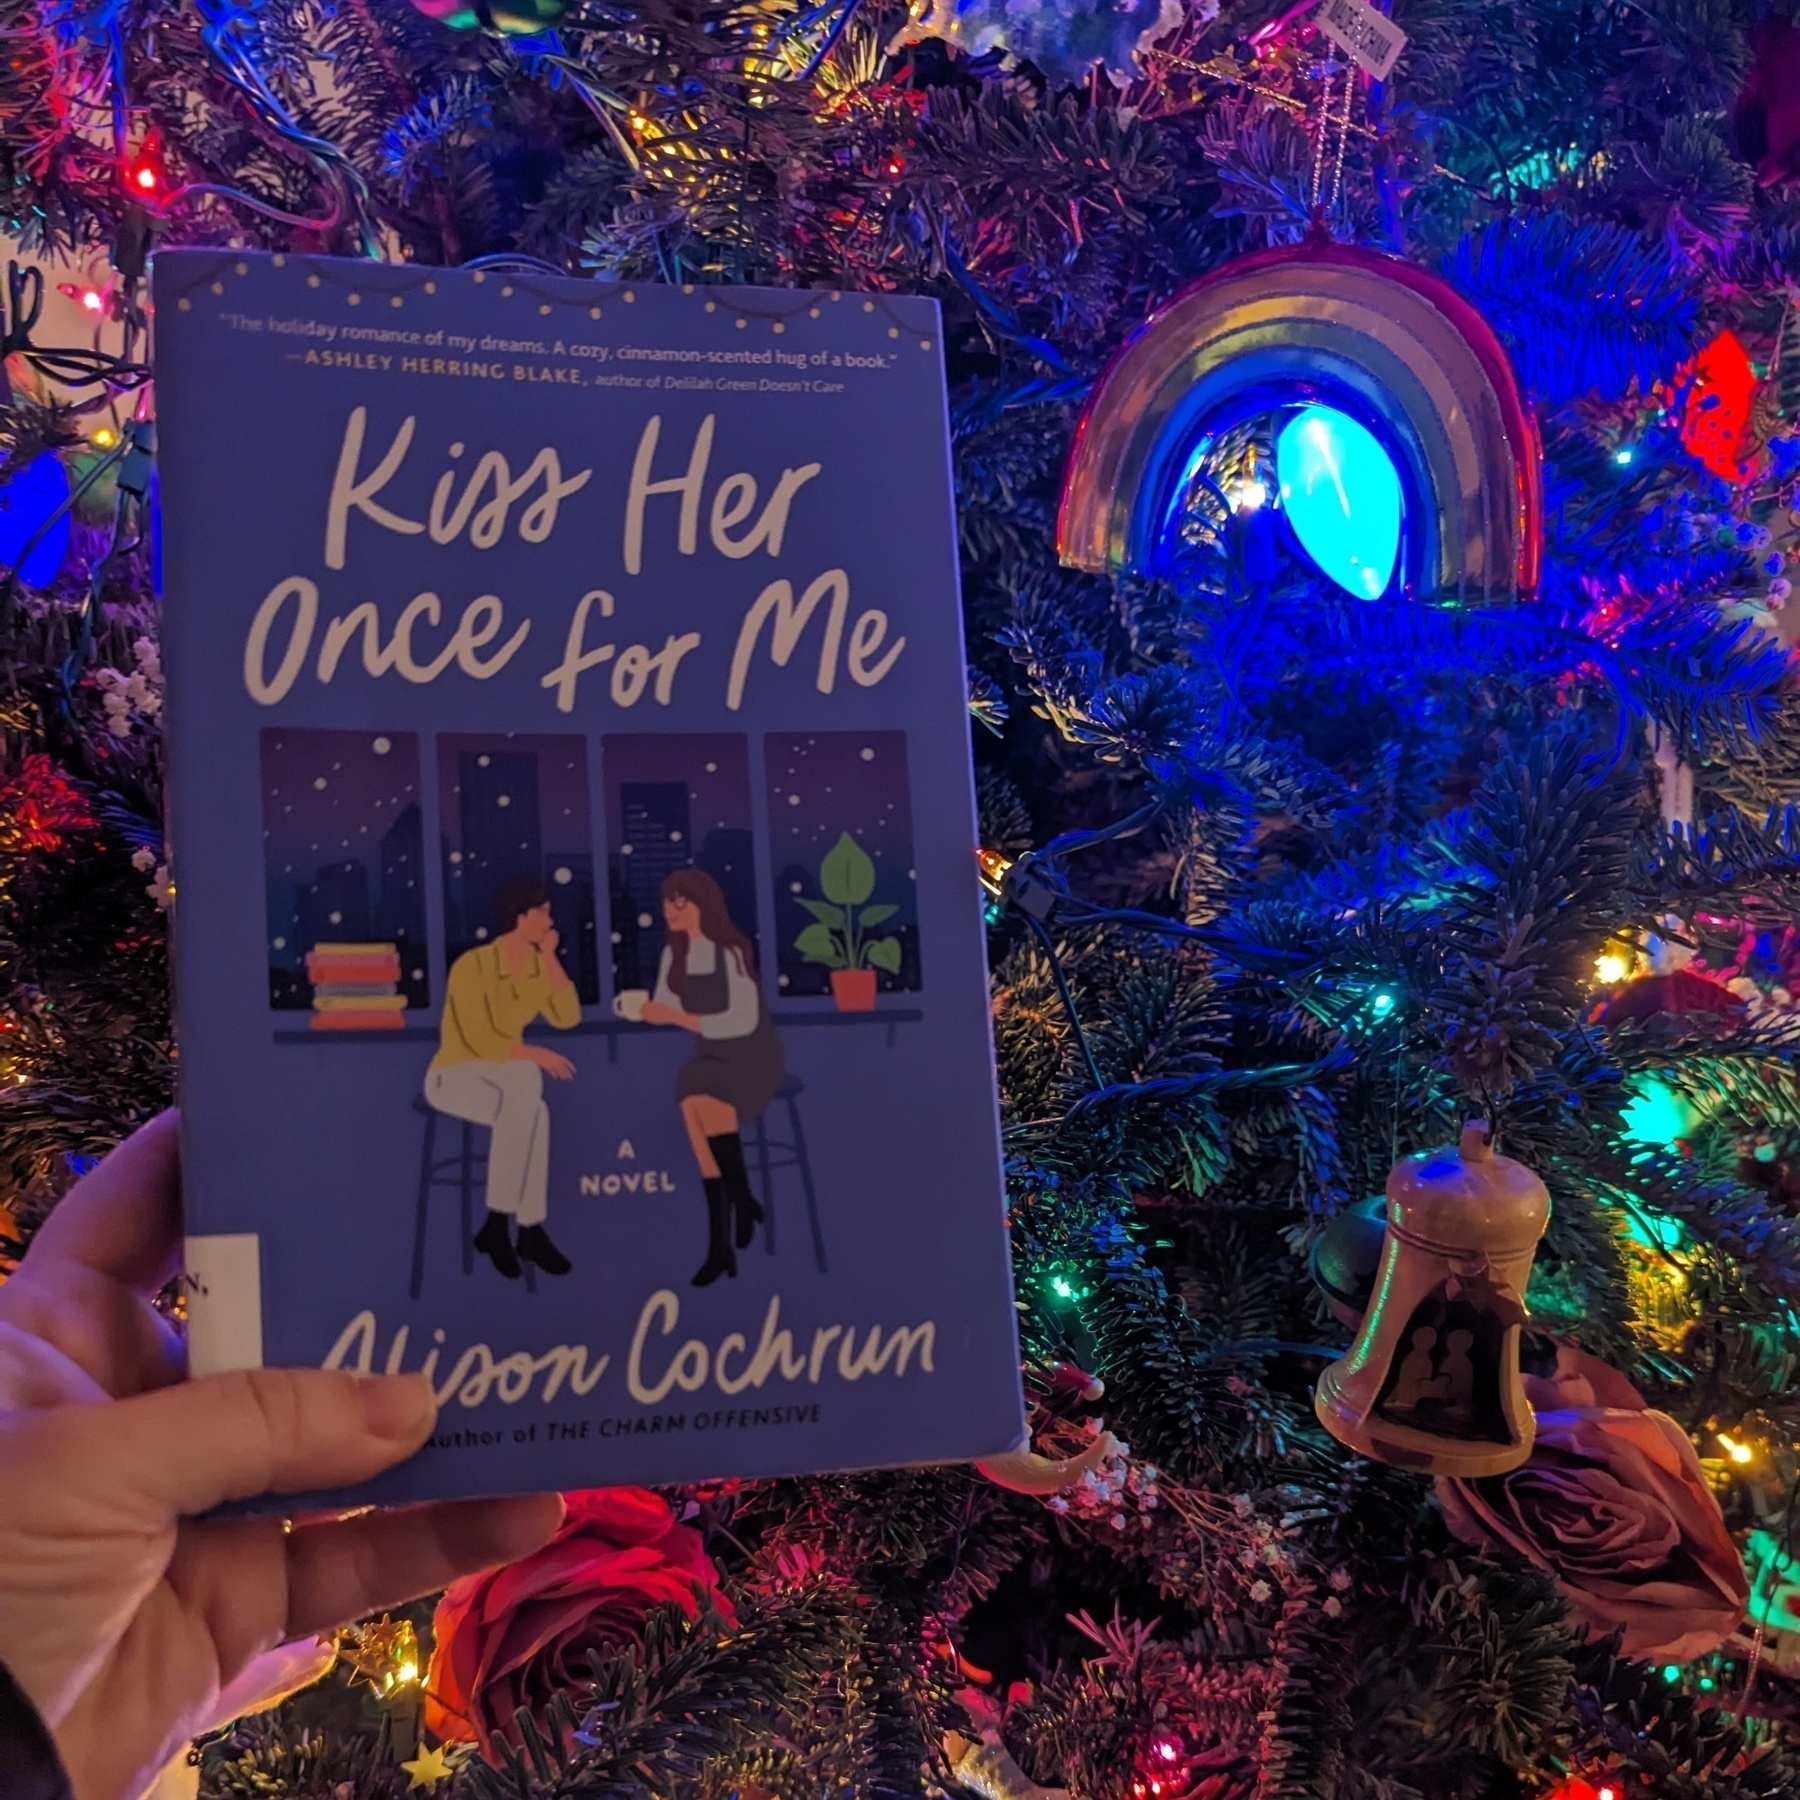 A hand holding a book titled 'Kiss Her Once for Me' by Alison Cochrum in front of a brightly decorated Christmas tree with colorful lights and ornaments.